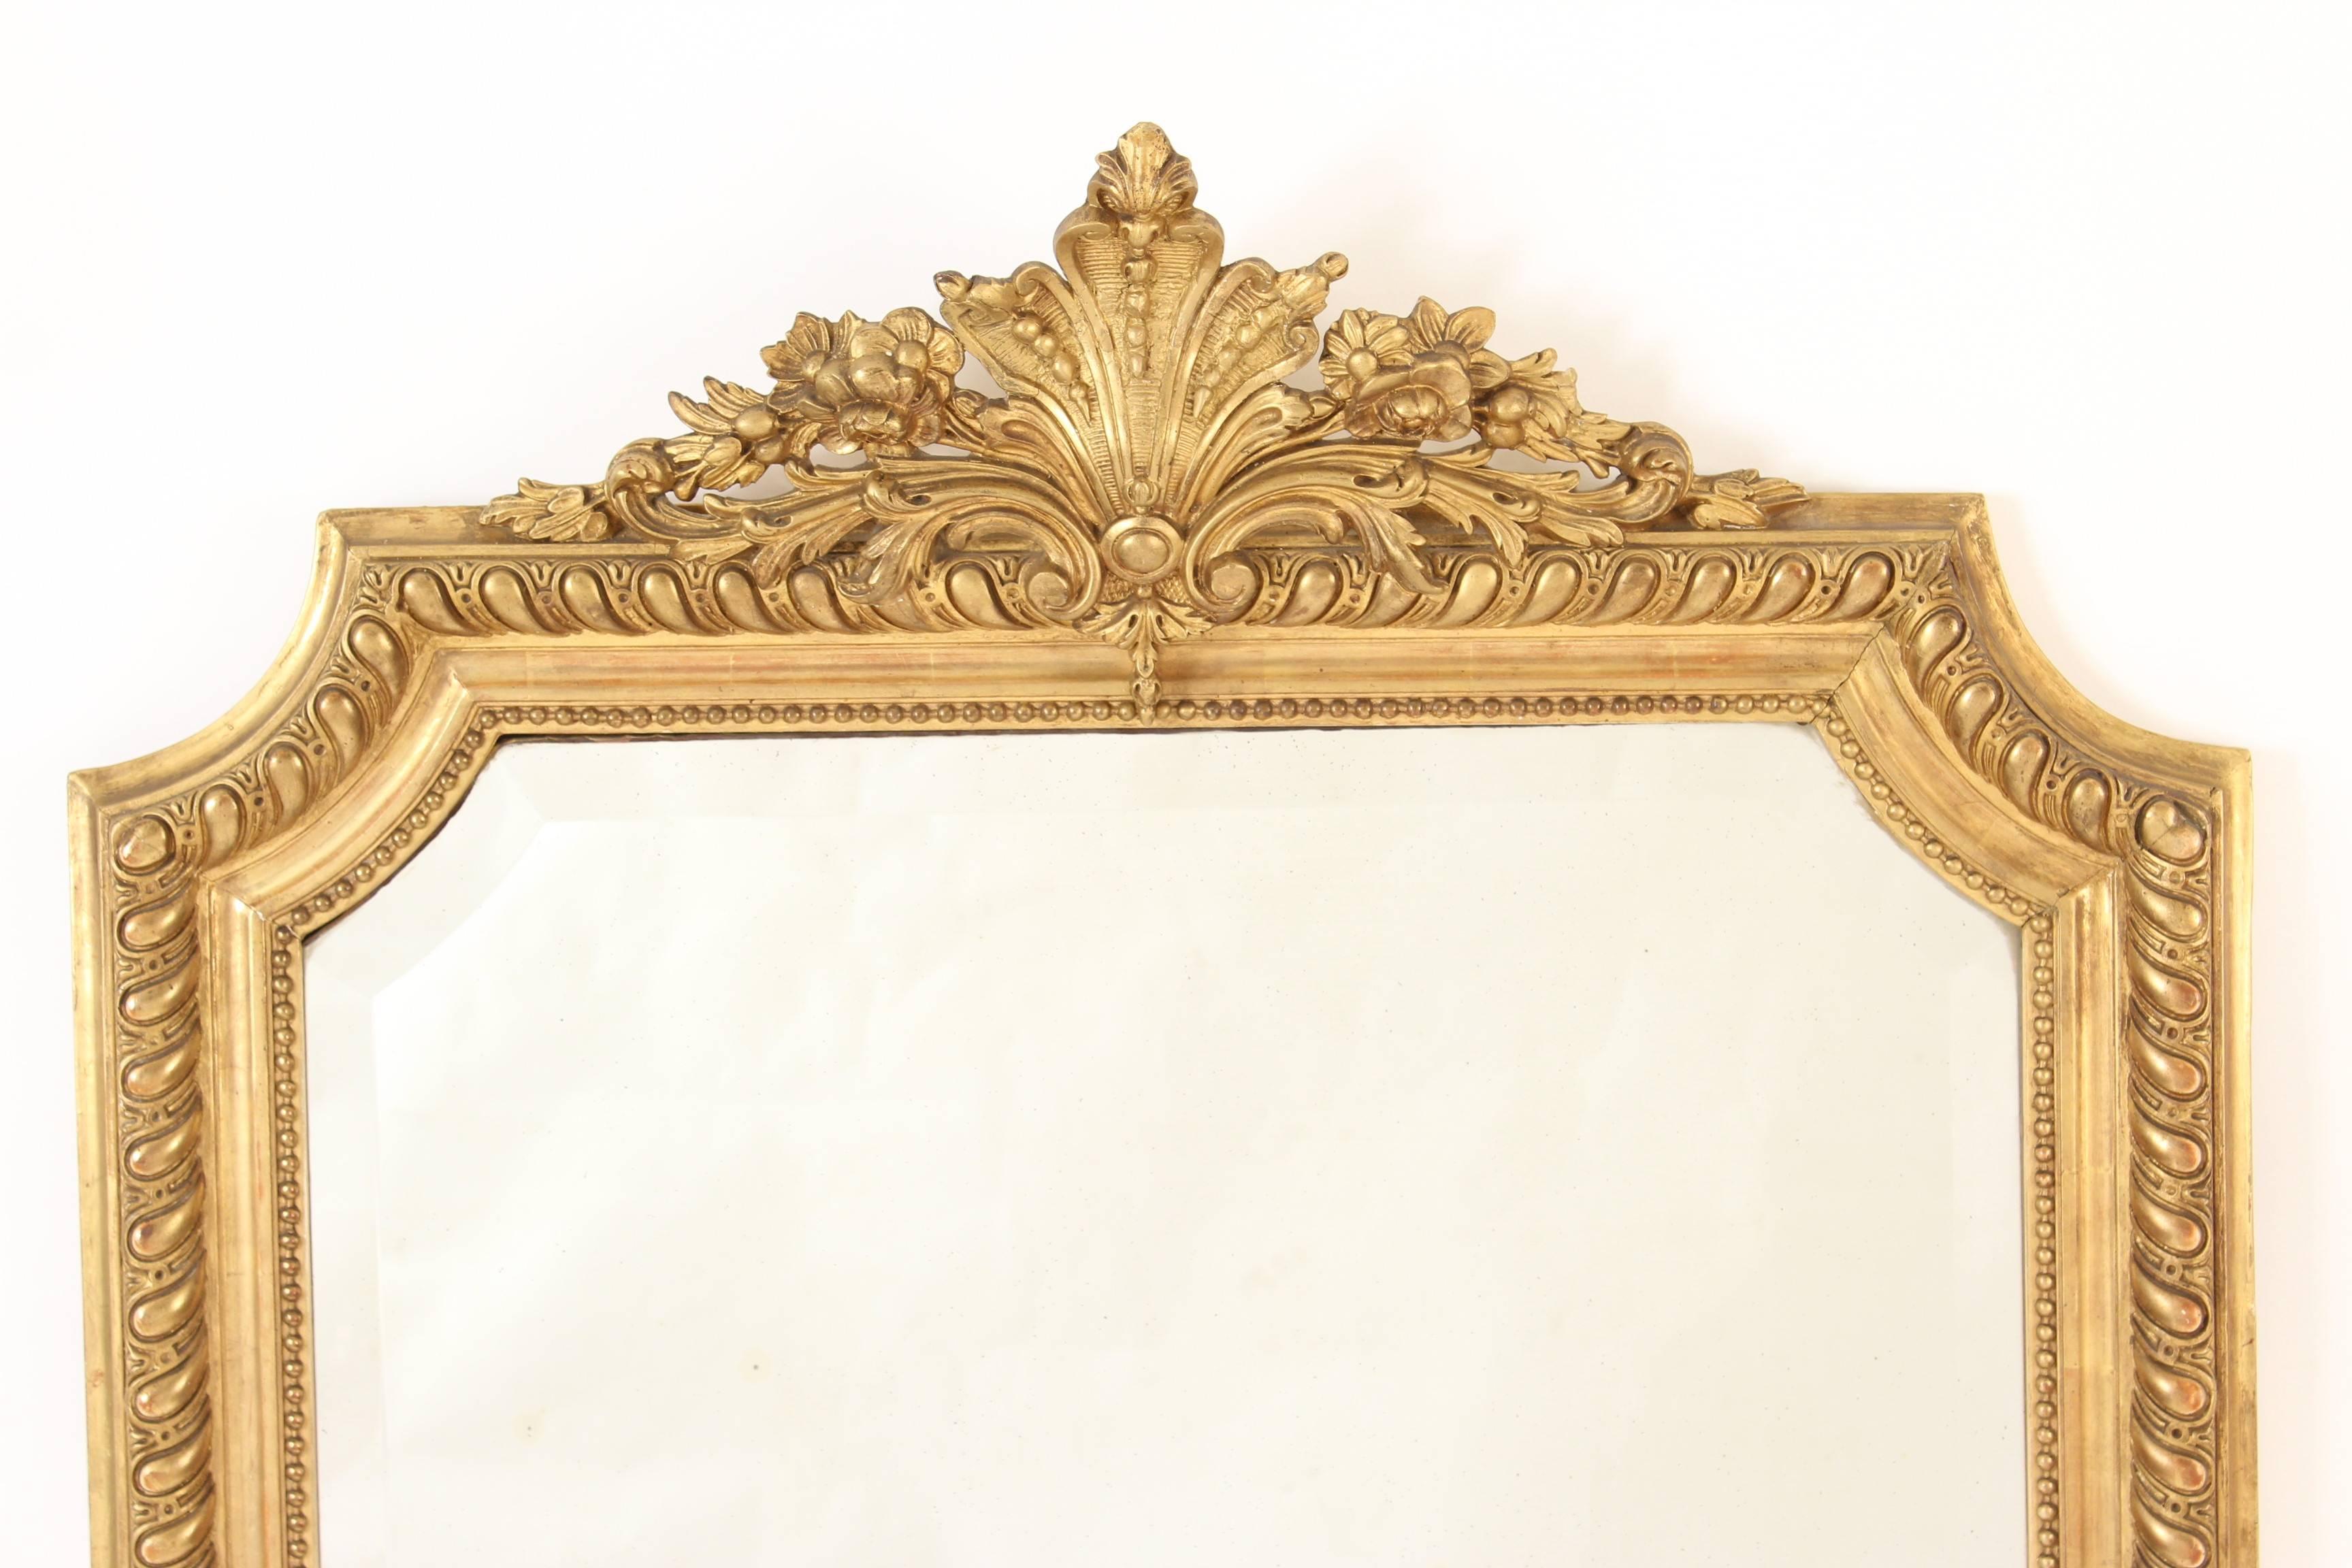 Louis XVI style gold leaf mirror with beveled glass, circa 1890-1910.